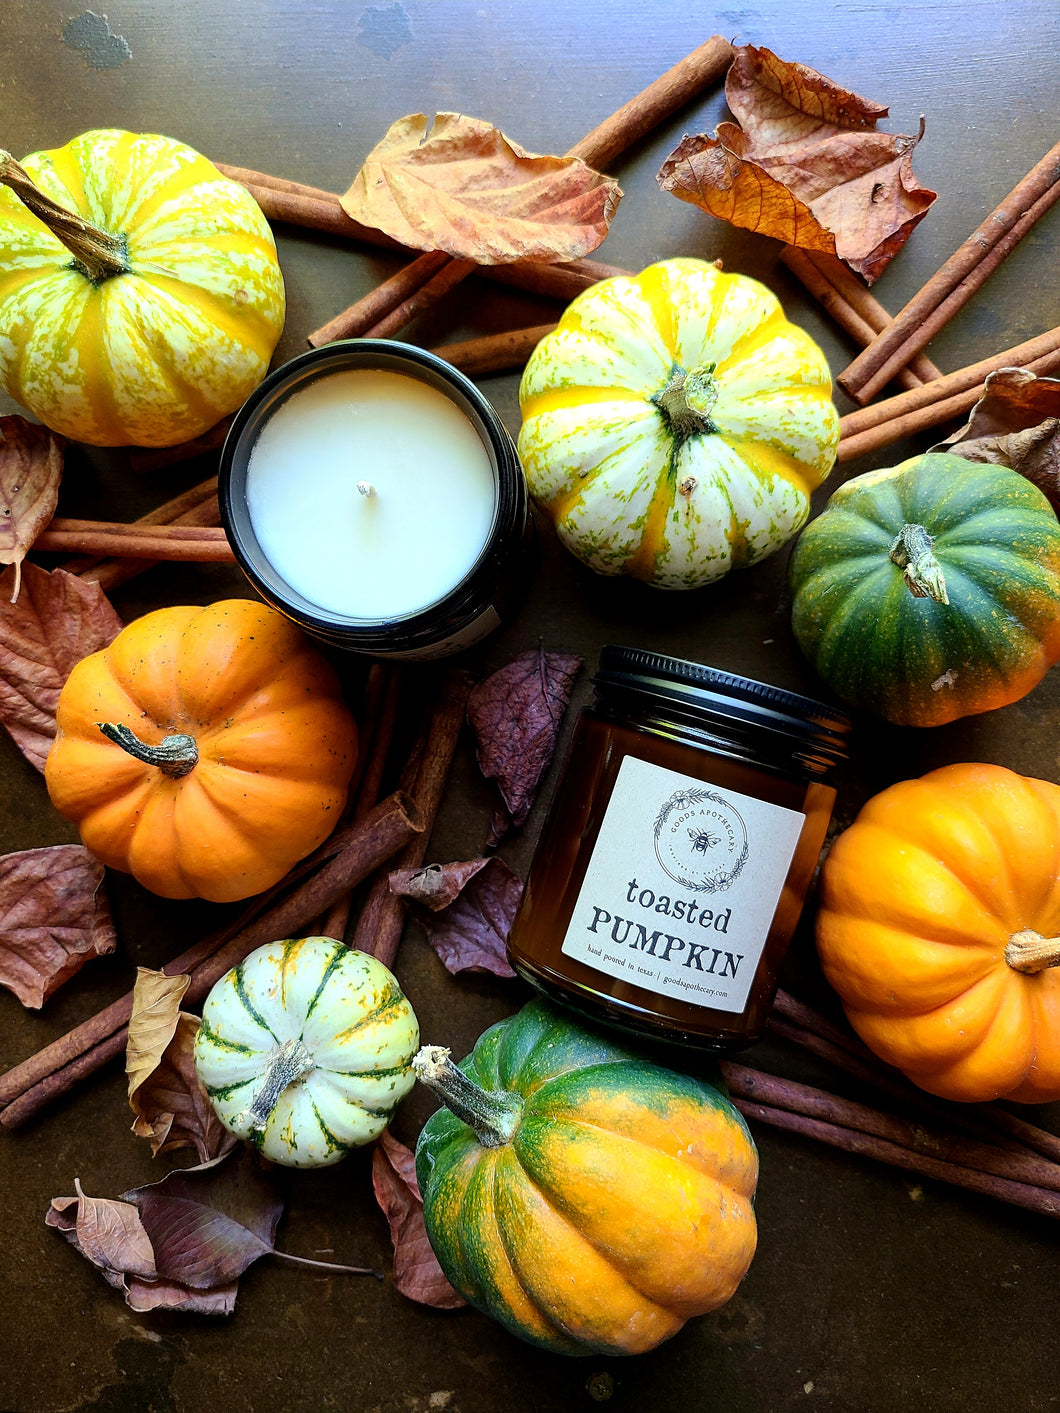 Toasted Pumpkin Candle and Wax Melts